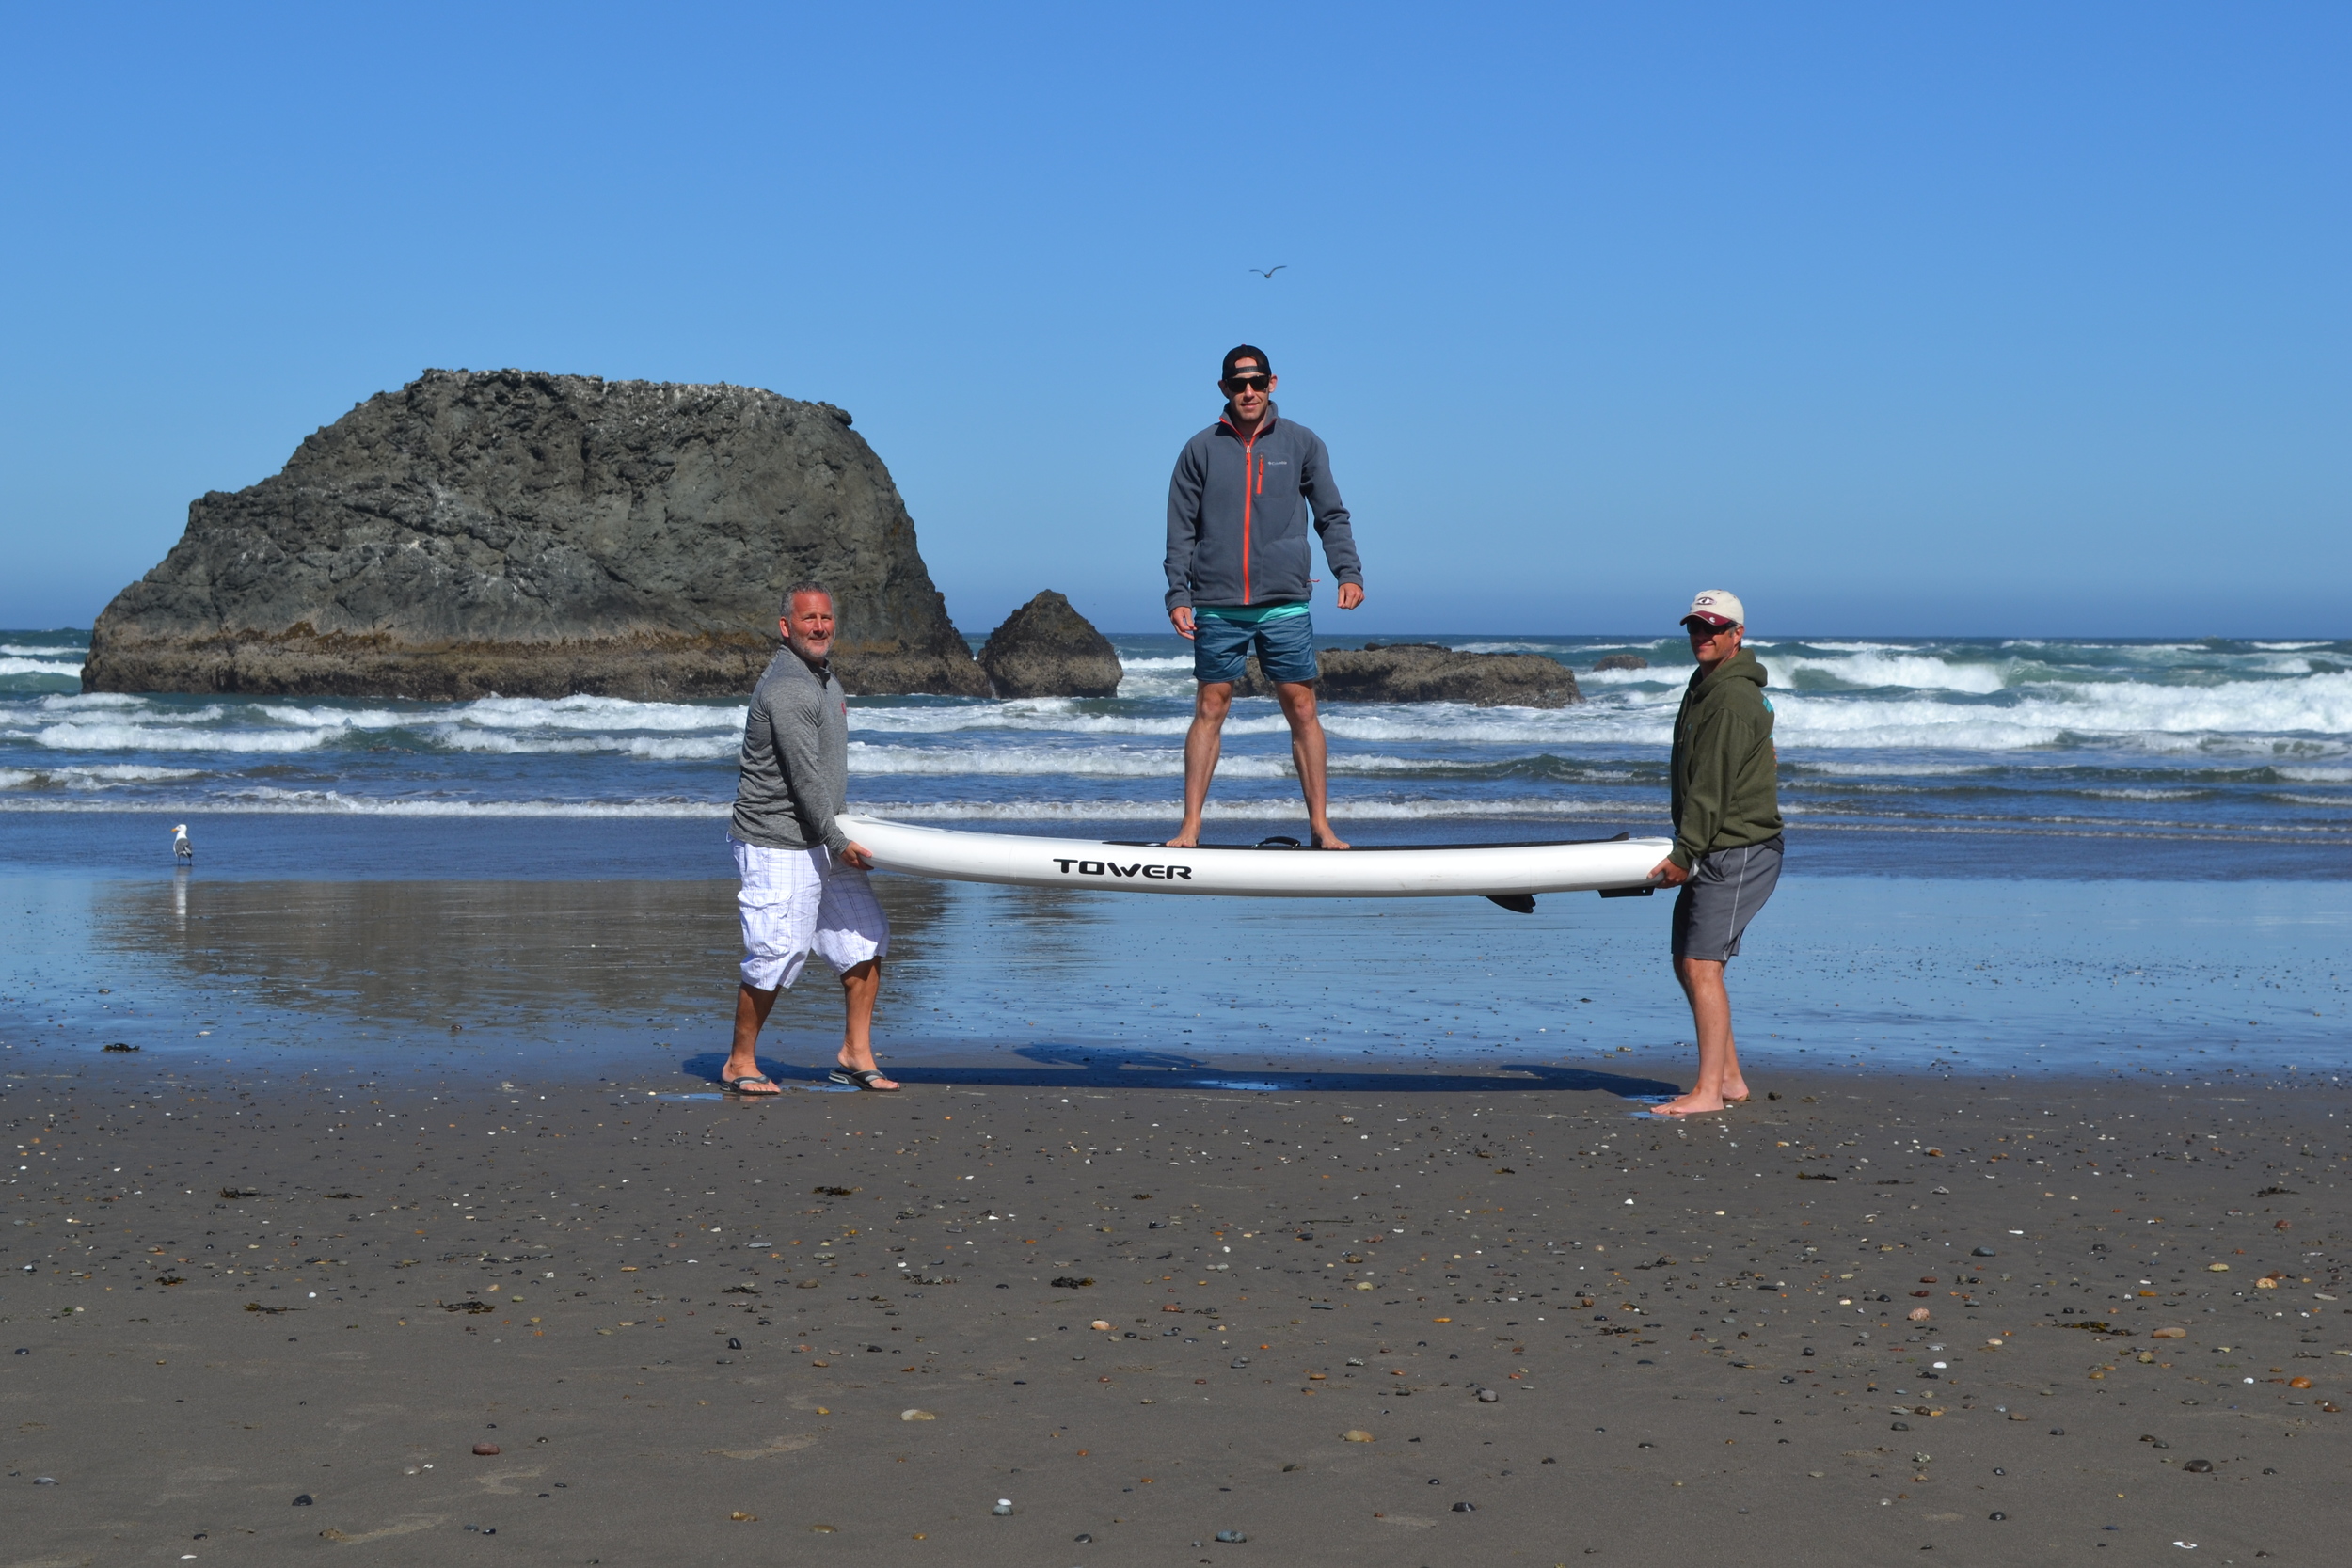 One of our co-founders Scott took the family to the Oregon Coast recently.  Somehow he was able to sucker Jeff and Rick into holding him and the board up so he could demonstrate just how rigid our inflatable boards are.